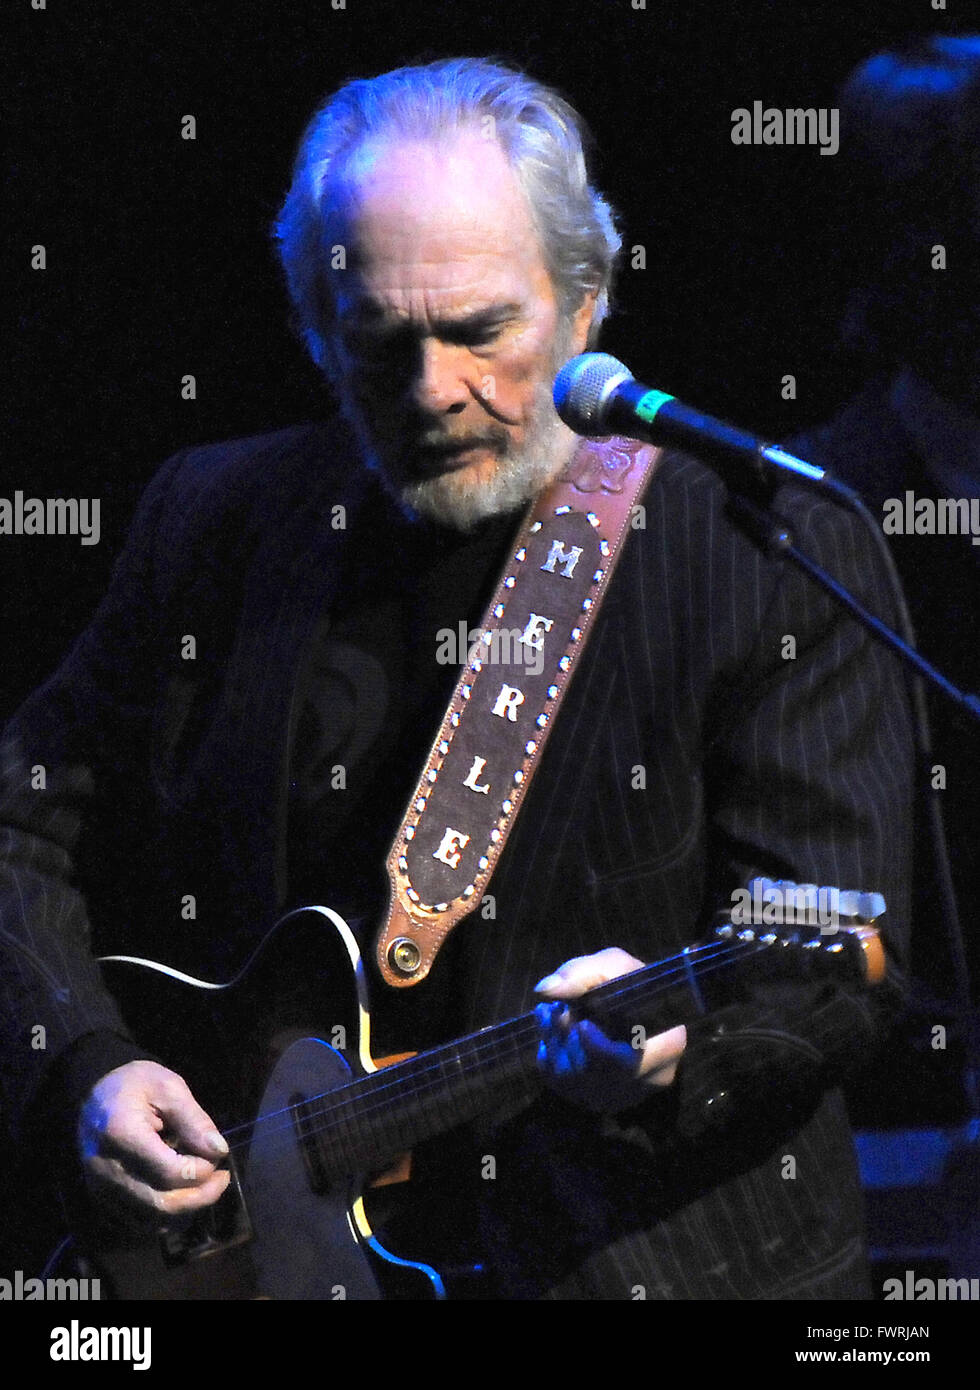 February 02, 2011 - Melbourne, Florida, United States - Country music legend Merle Haggard performs at the King Center for the P Stock Photo